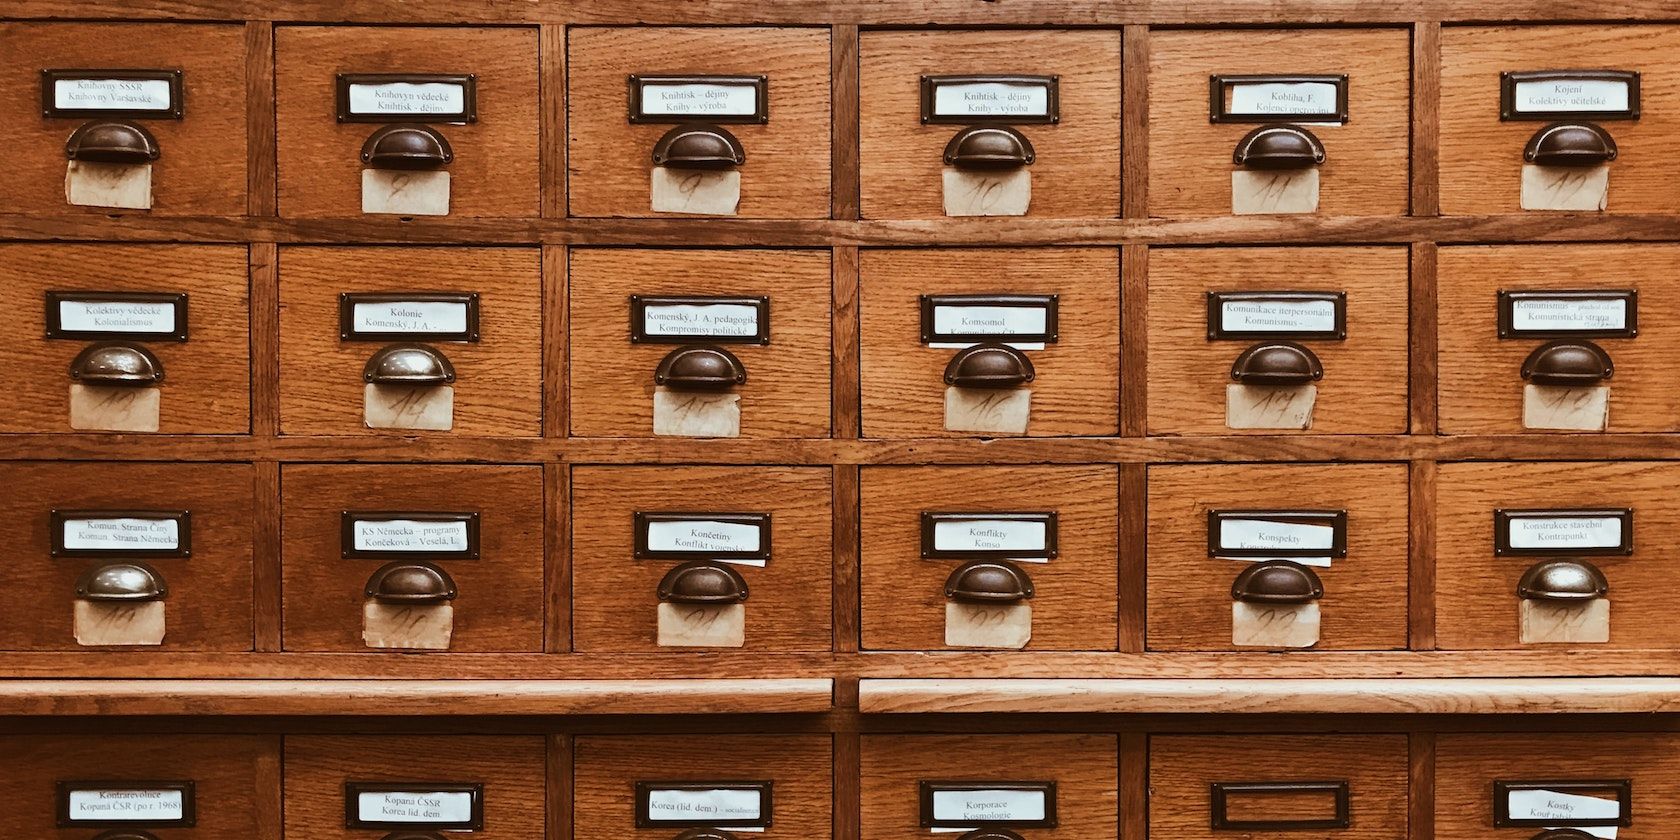 Old database with wooden drawers